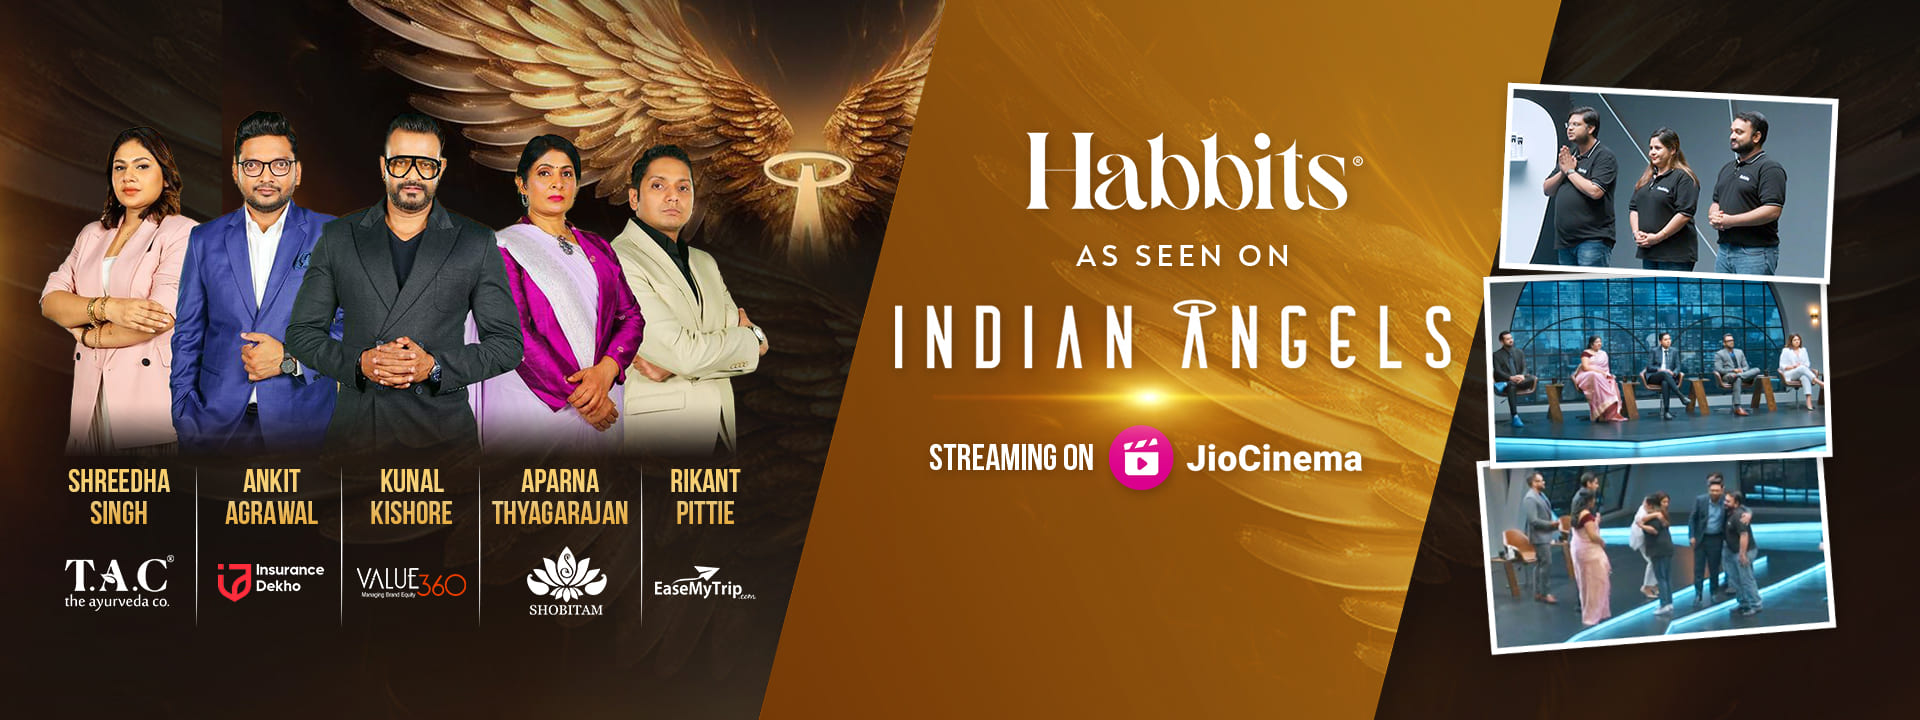 Load video: Best Pitch by Habbits on Indian Angels Show by Jio Cinema